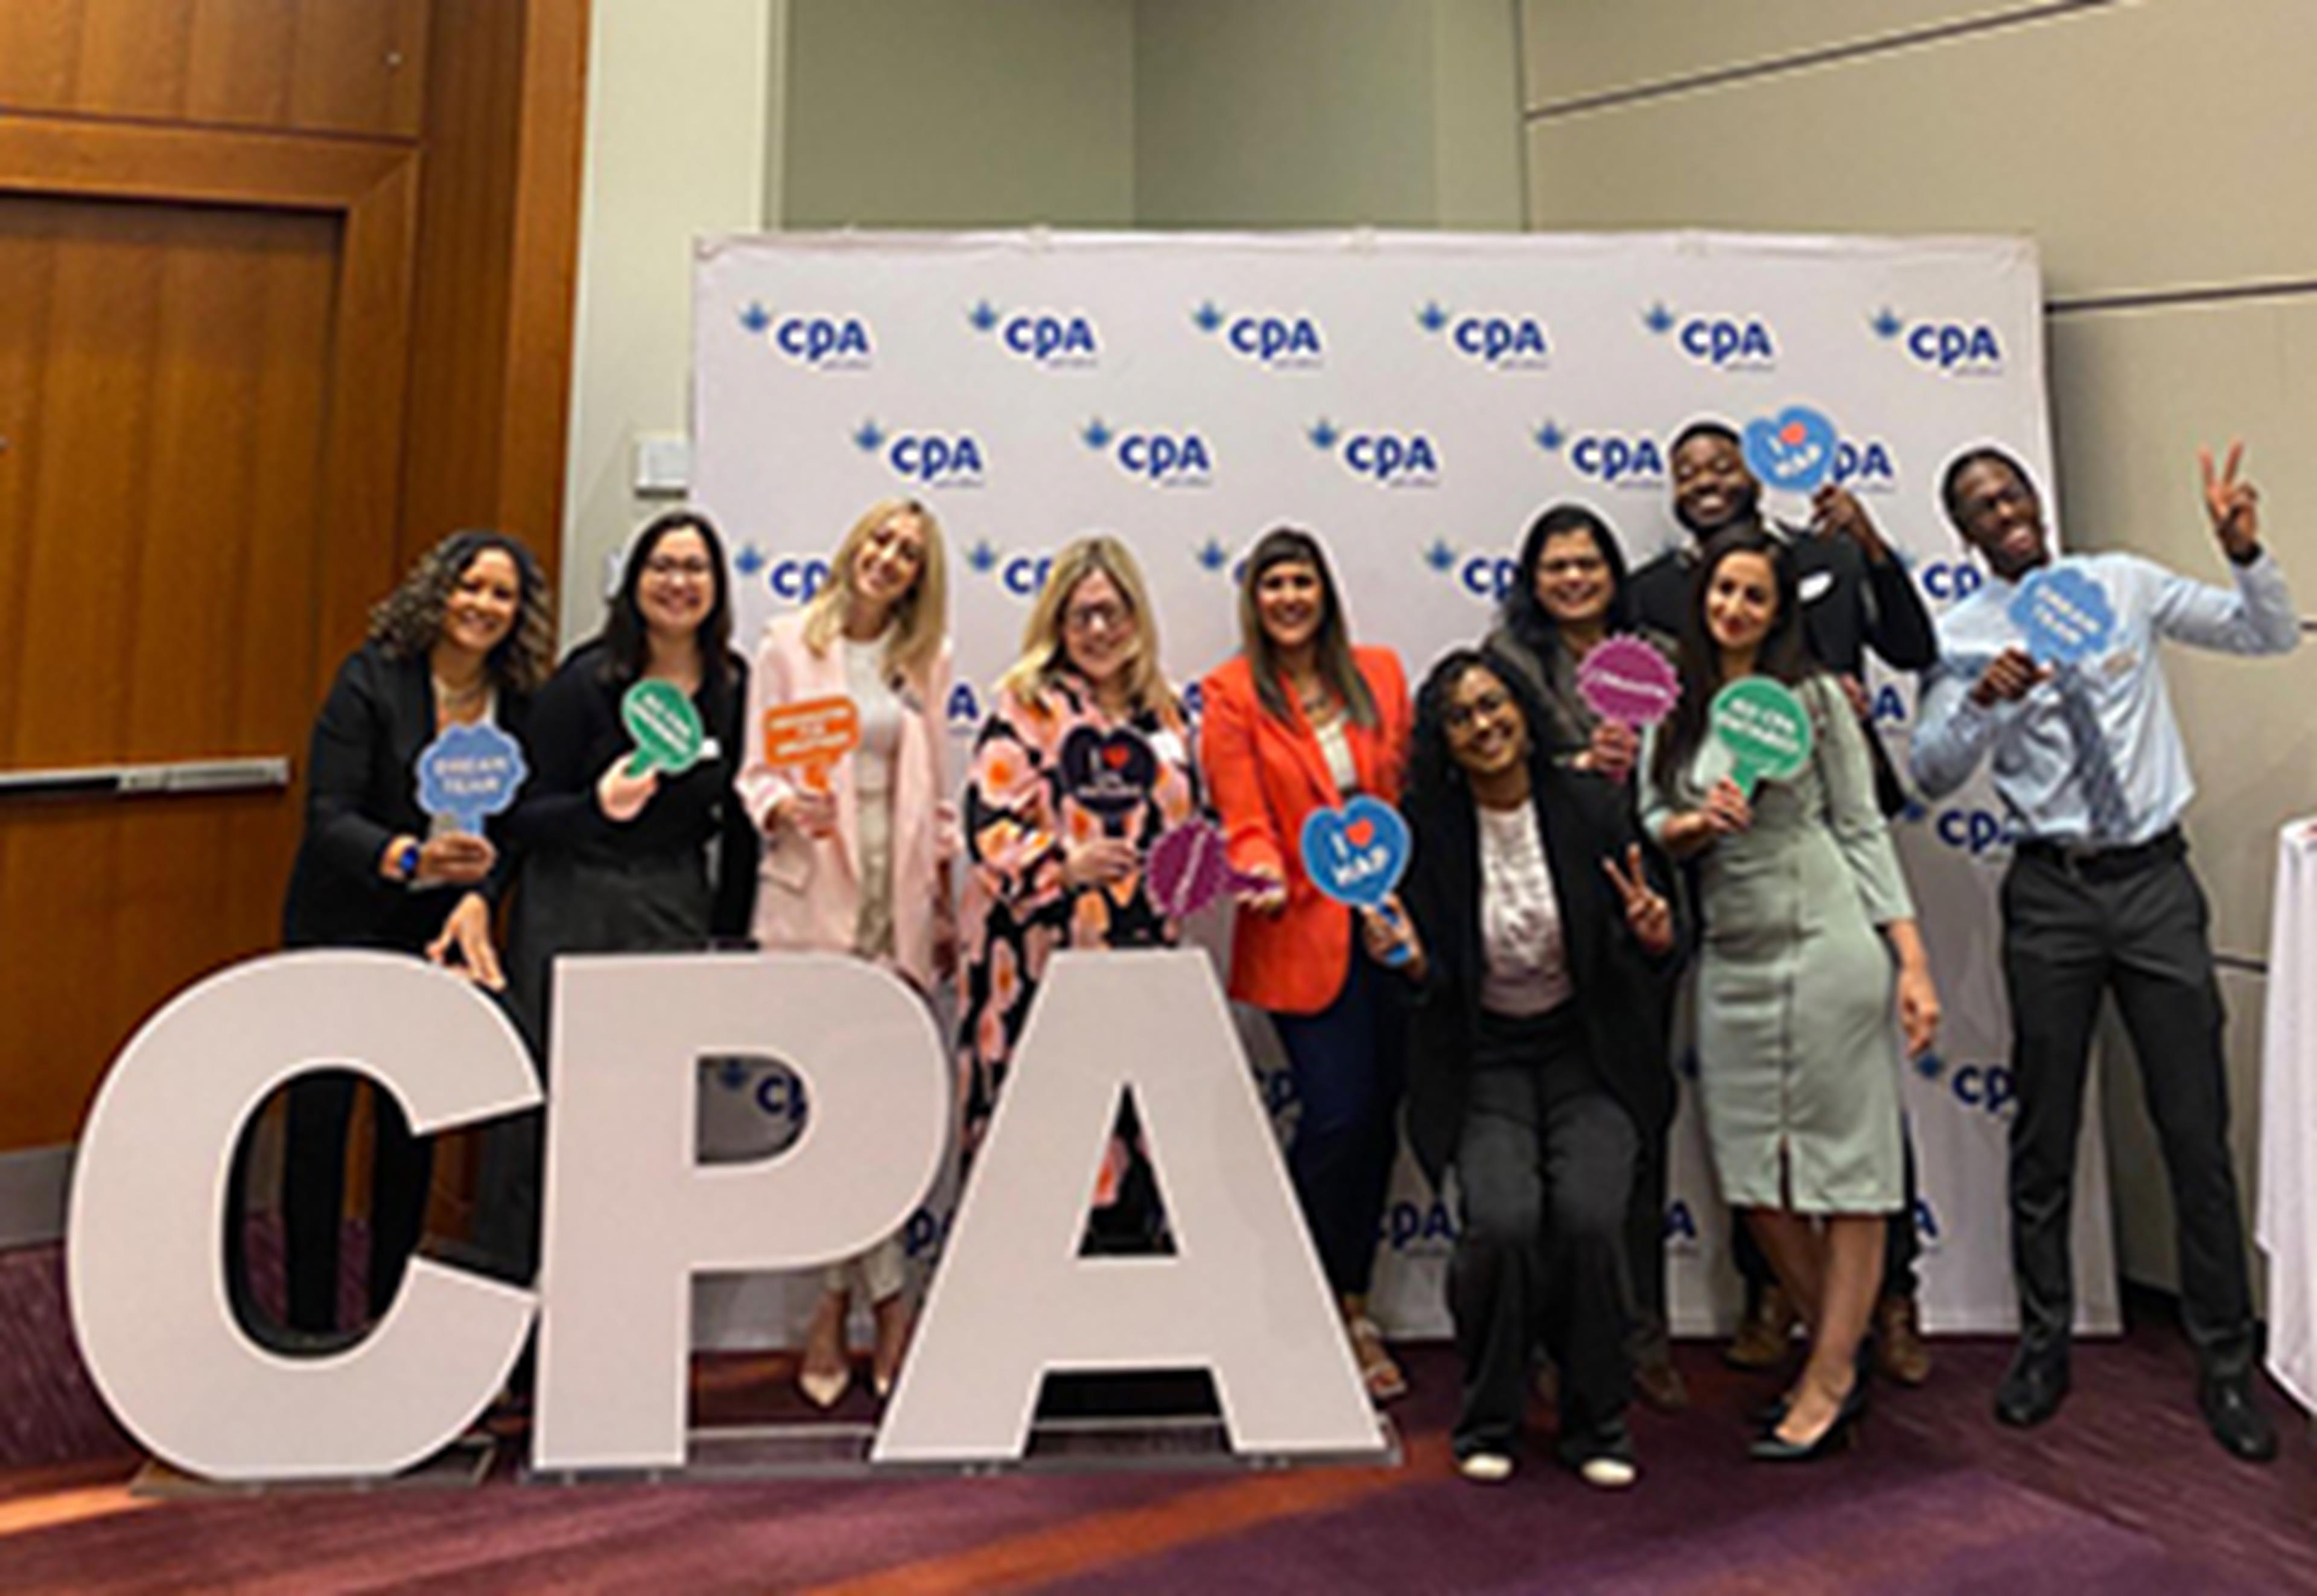 Group of recruiters around CPA sign